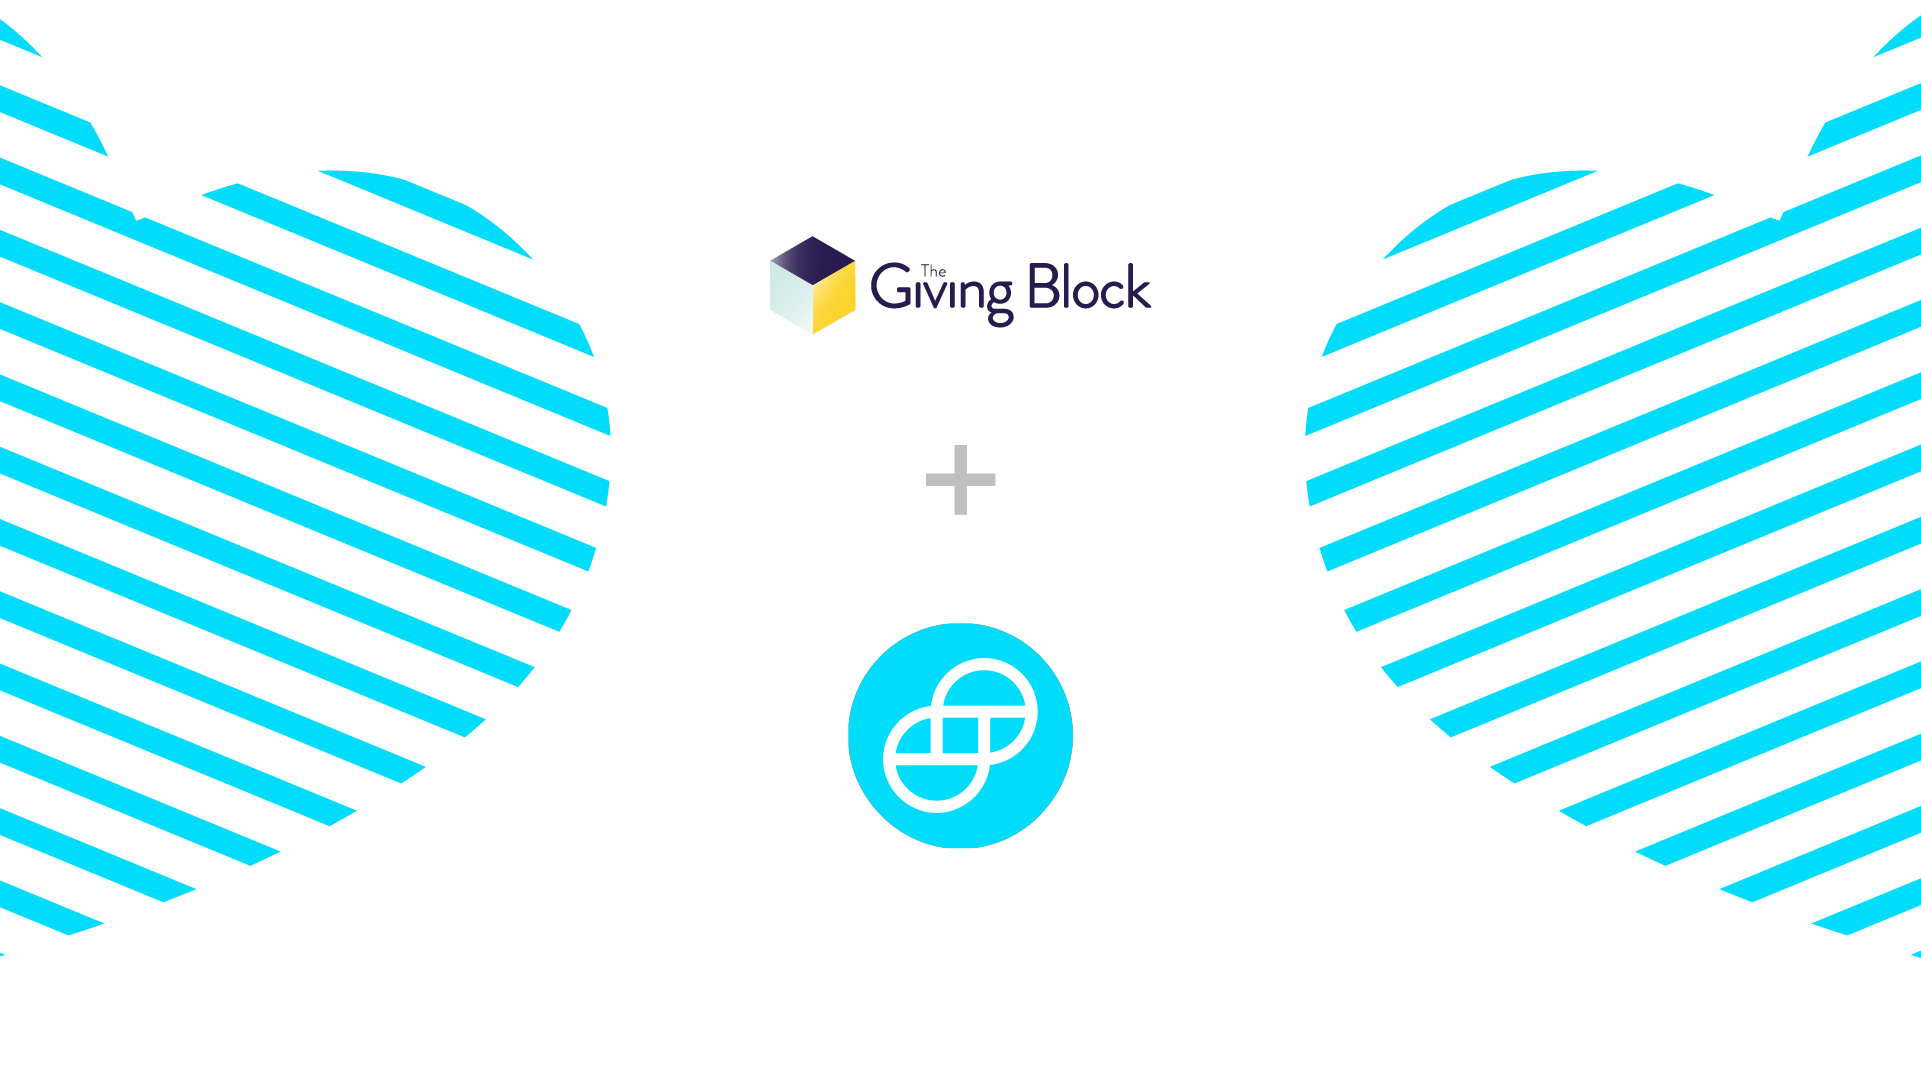 Gemini Launches Donate Feature, Partnering with Nonprofits and The Giving Block